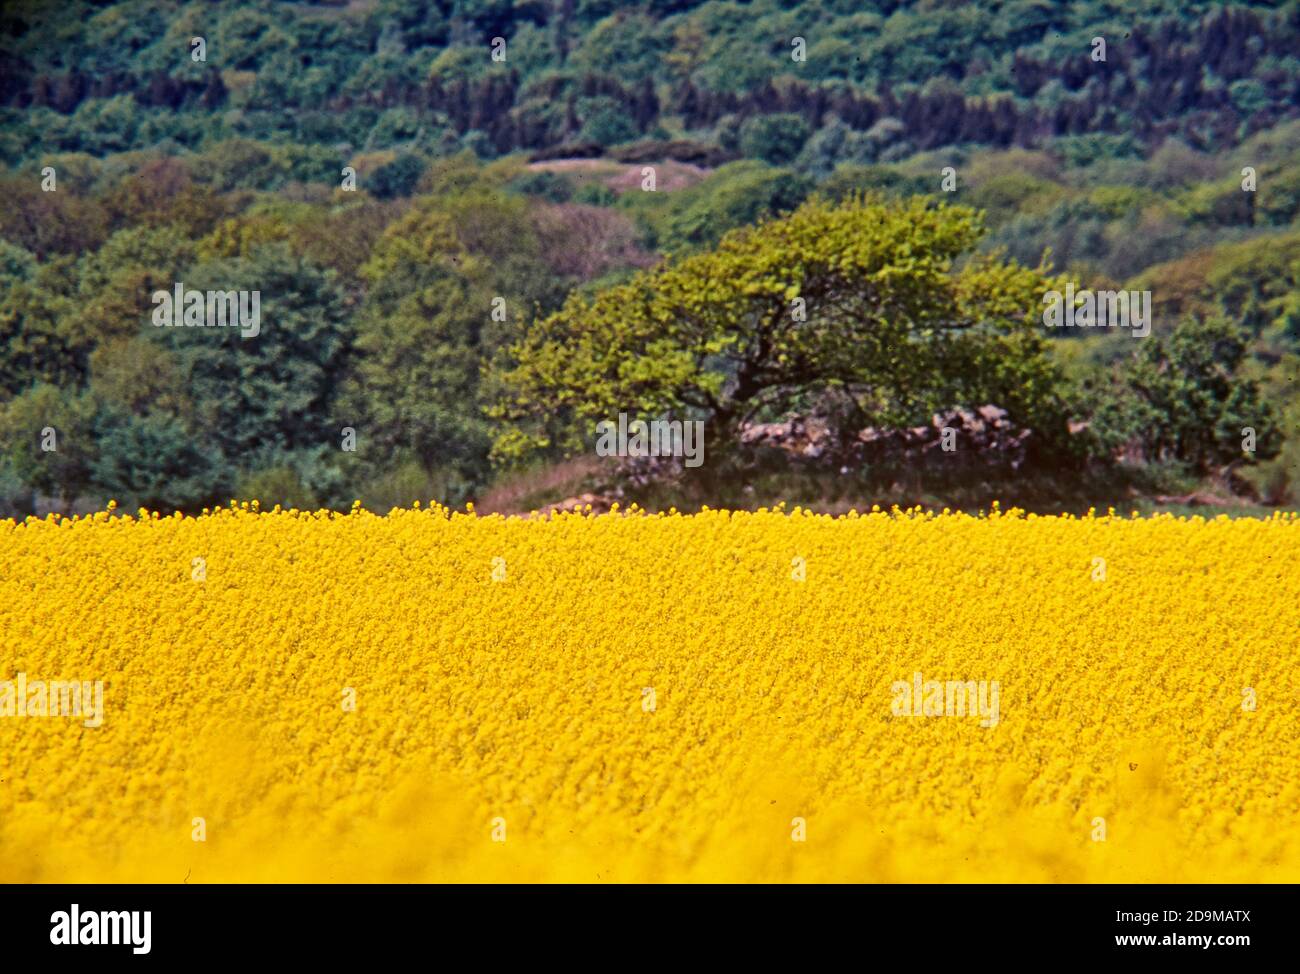 Oilseed Rapes (Brassica napus) in a field with forest in the background, Vastergotland, Sweden Stock Photo